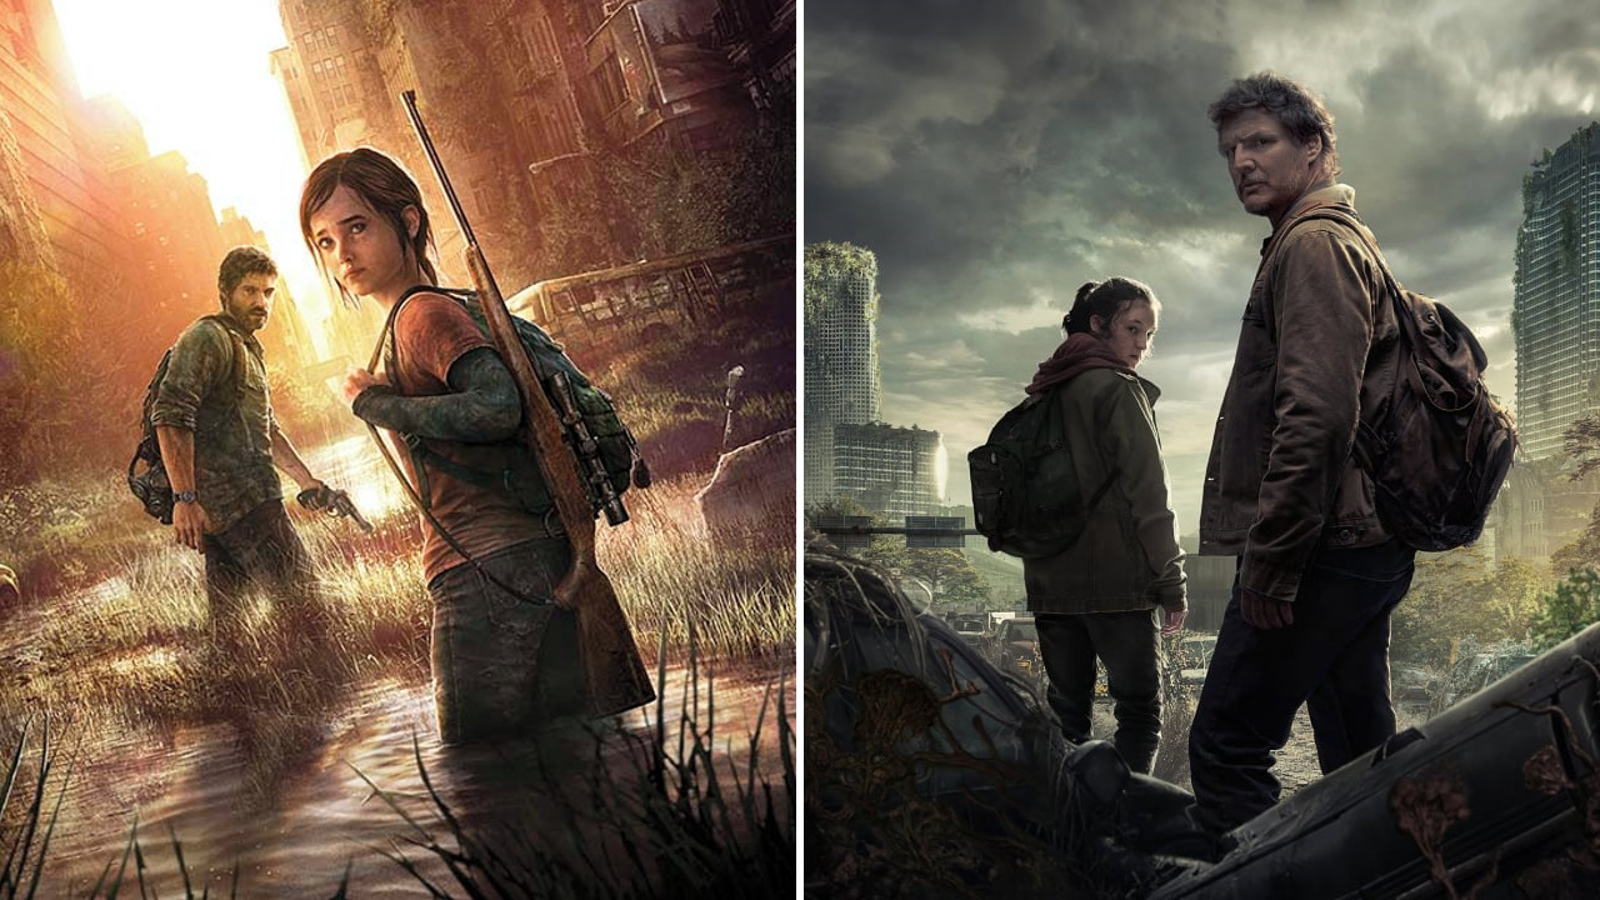 How long is The Last of Us?